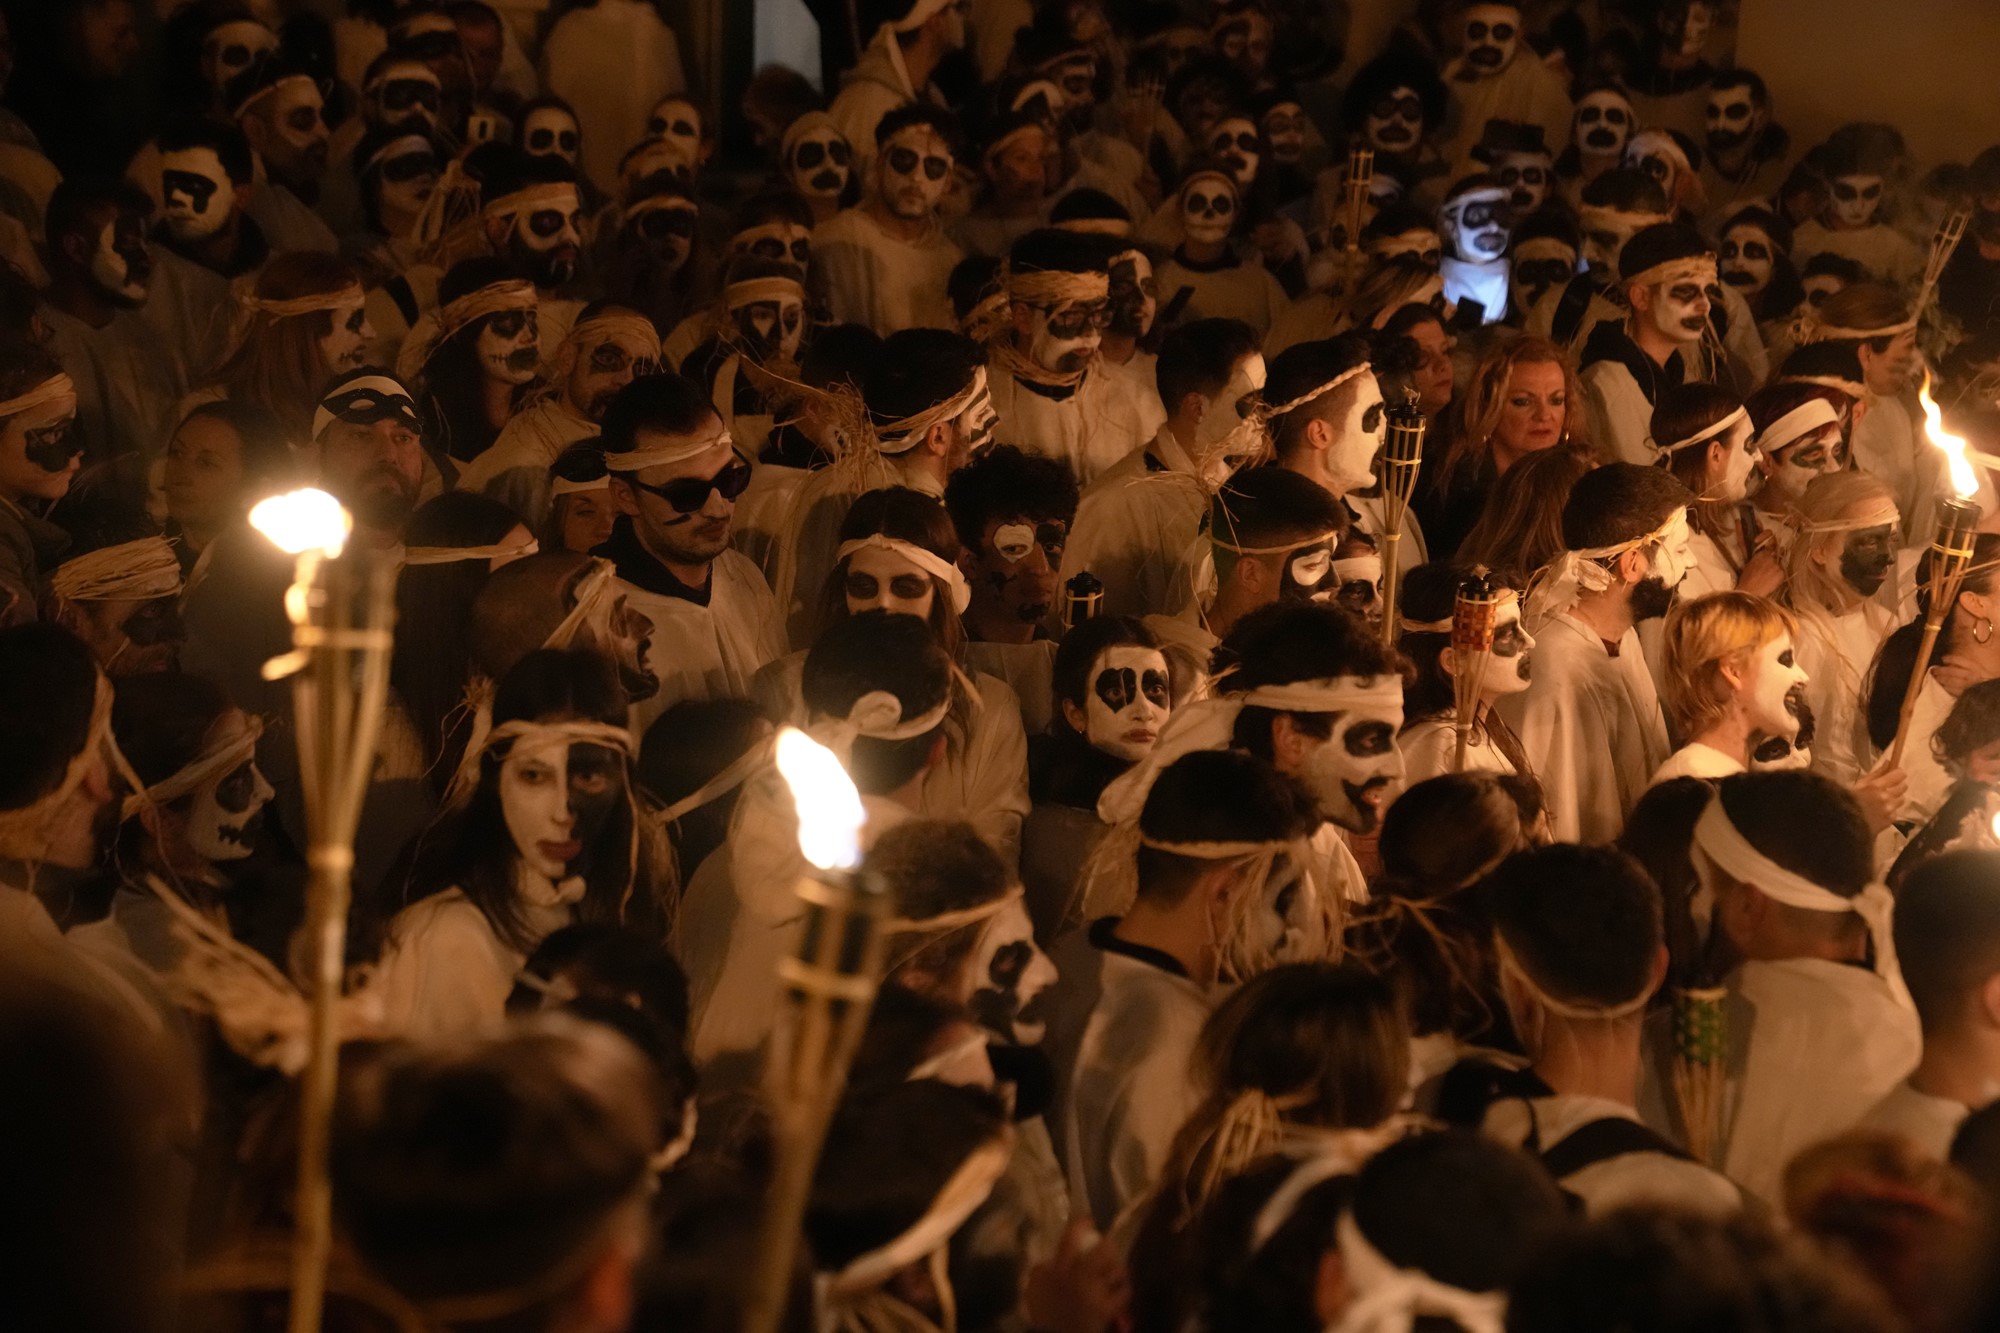 A crowd of people all with faces painted in black and white and wearing white robes walk through the street, some holding torches. 